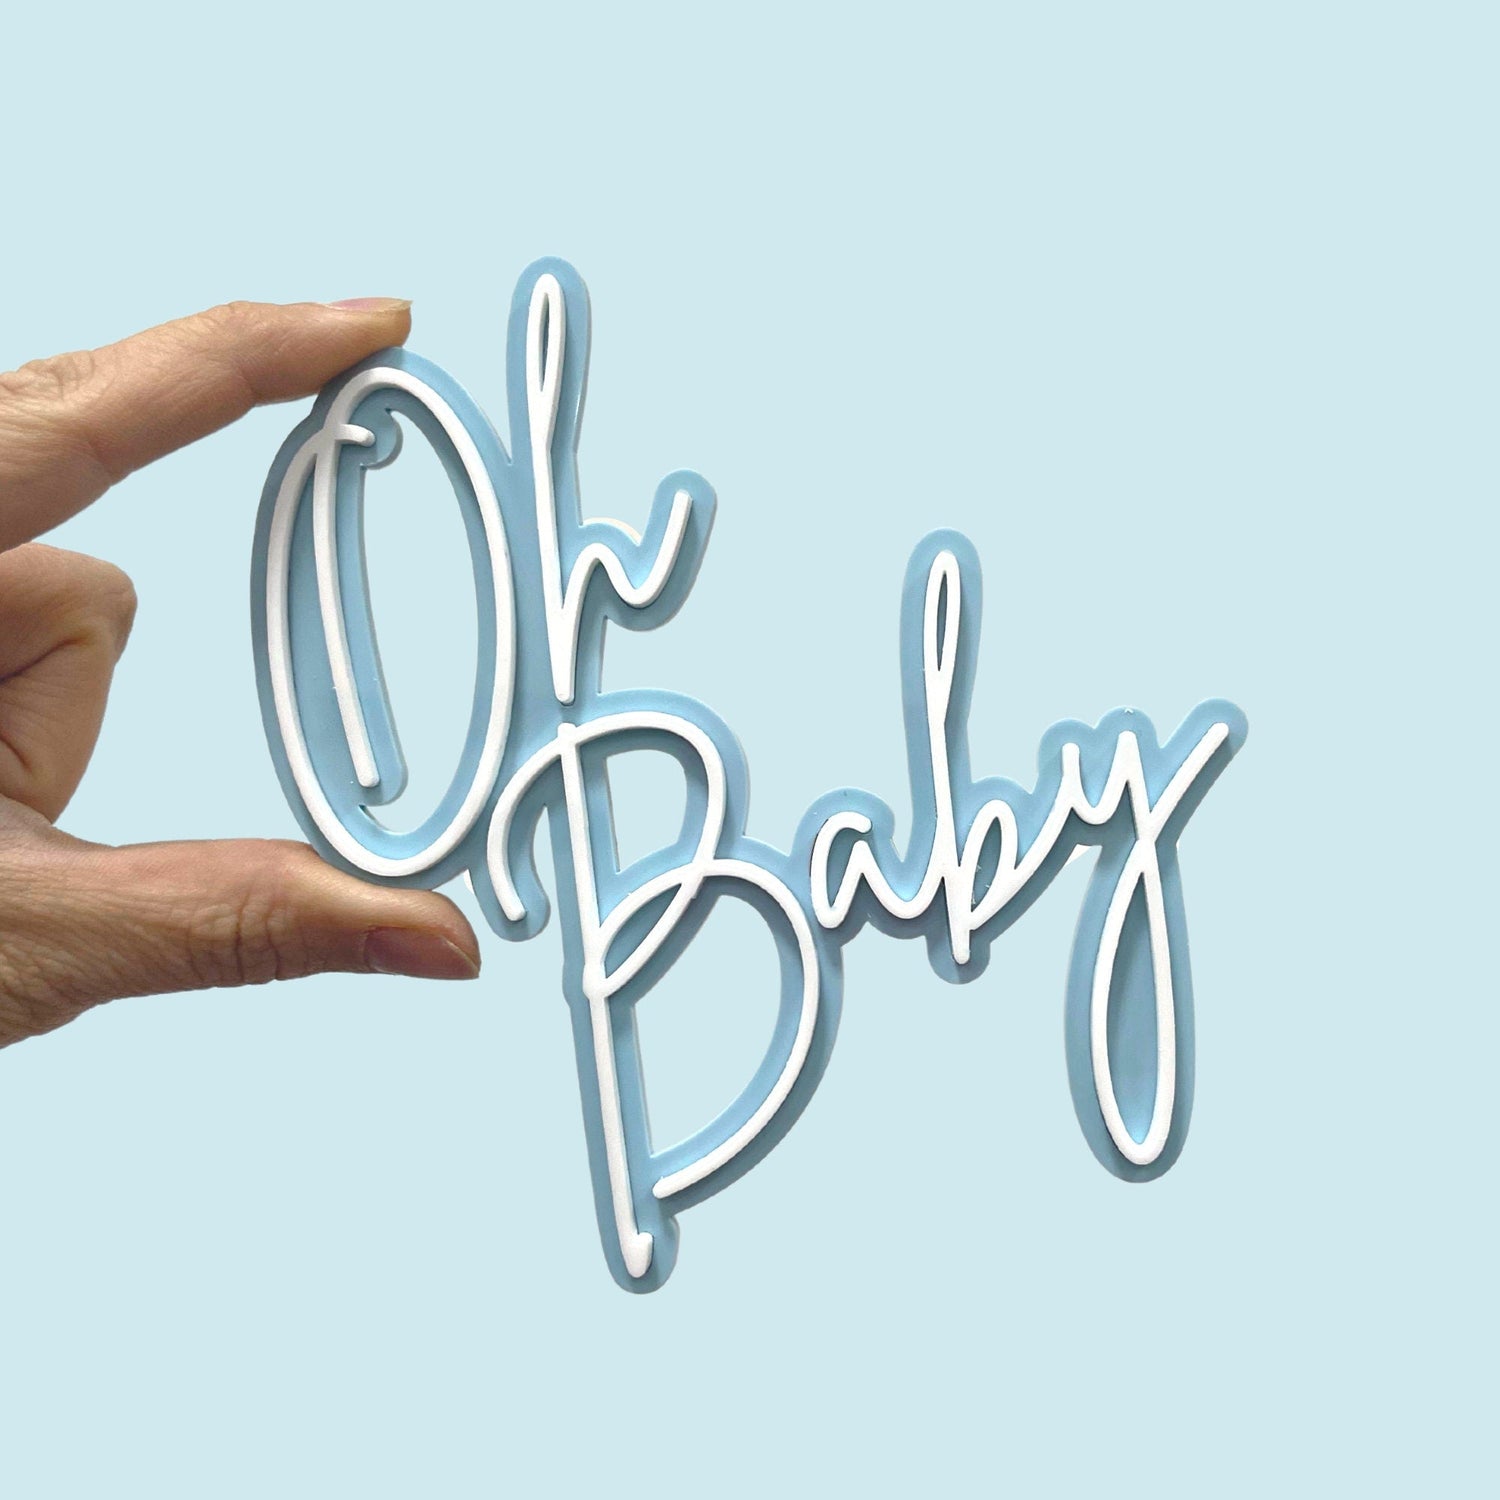 Oh Baby Acrylic Cake Charm Topper - Cake Topper Warehouse